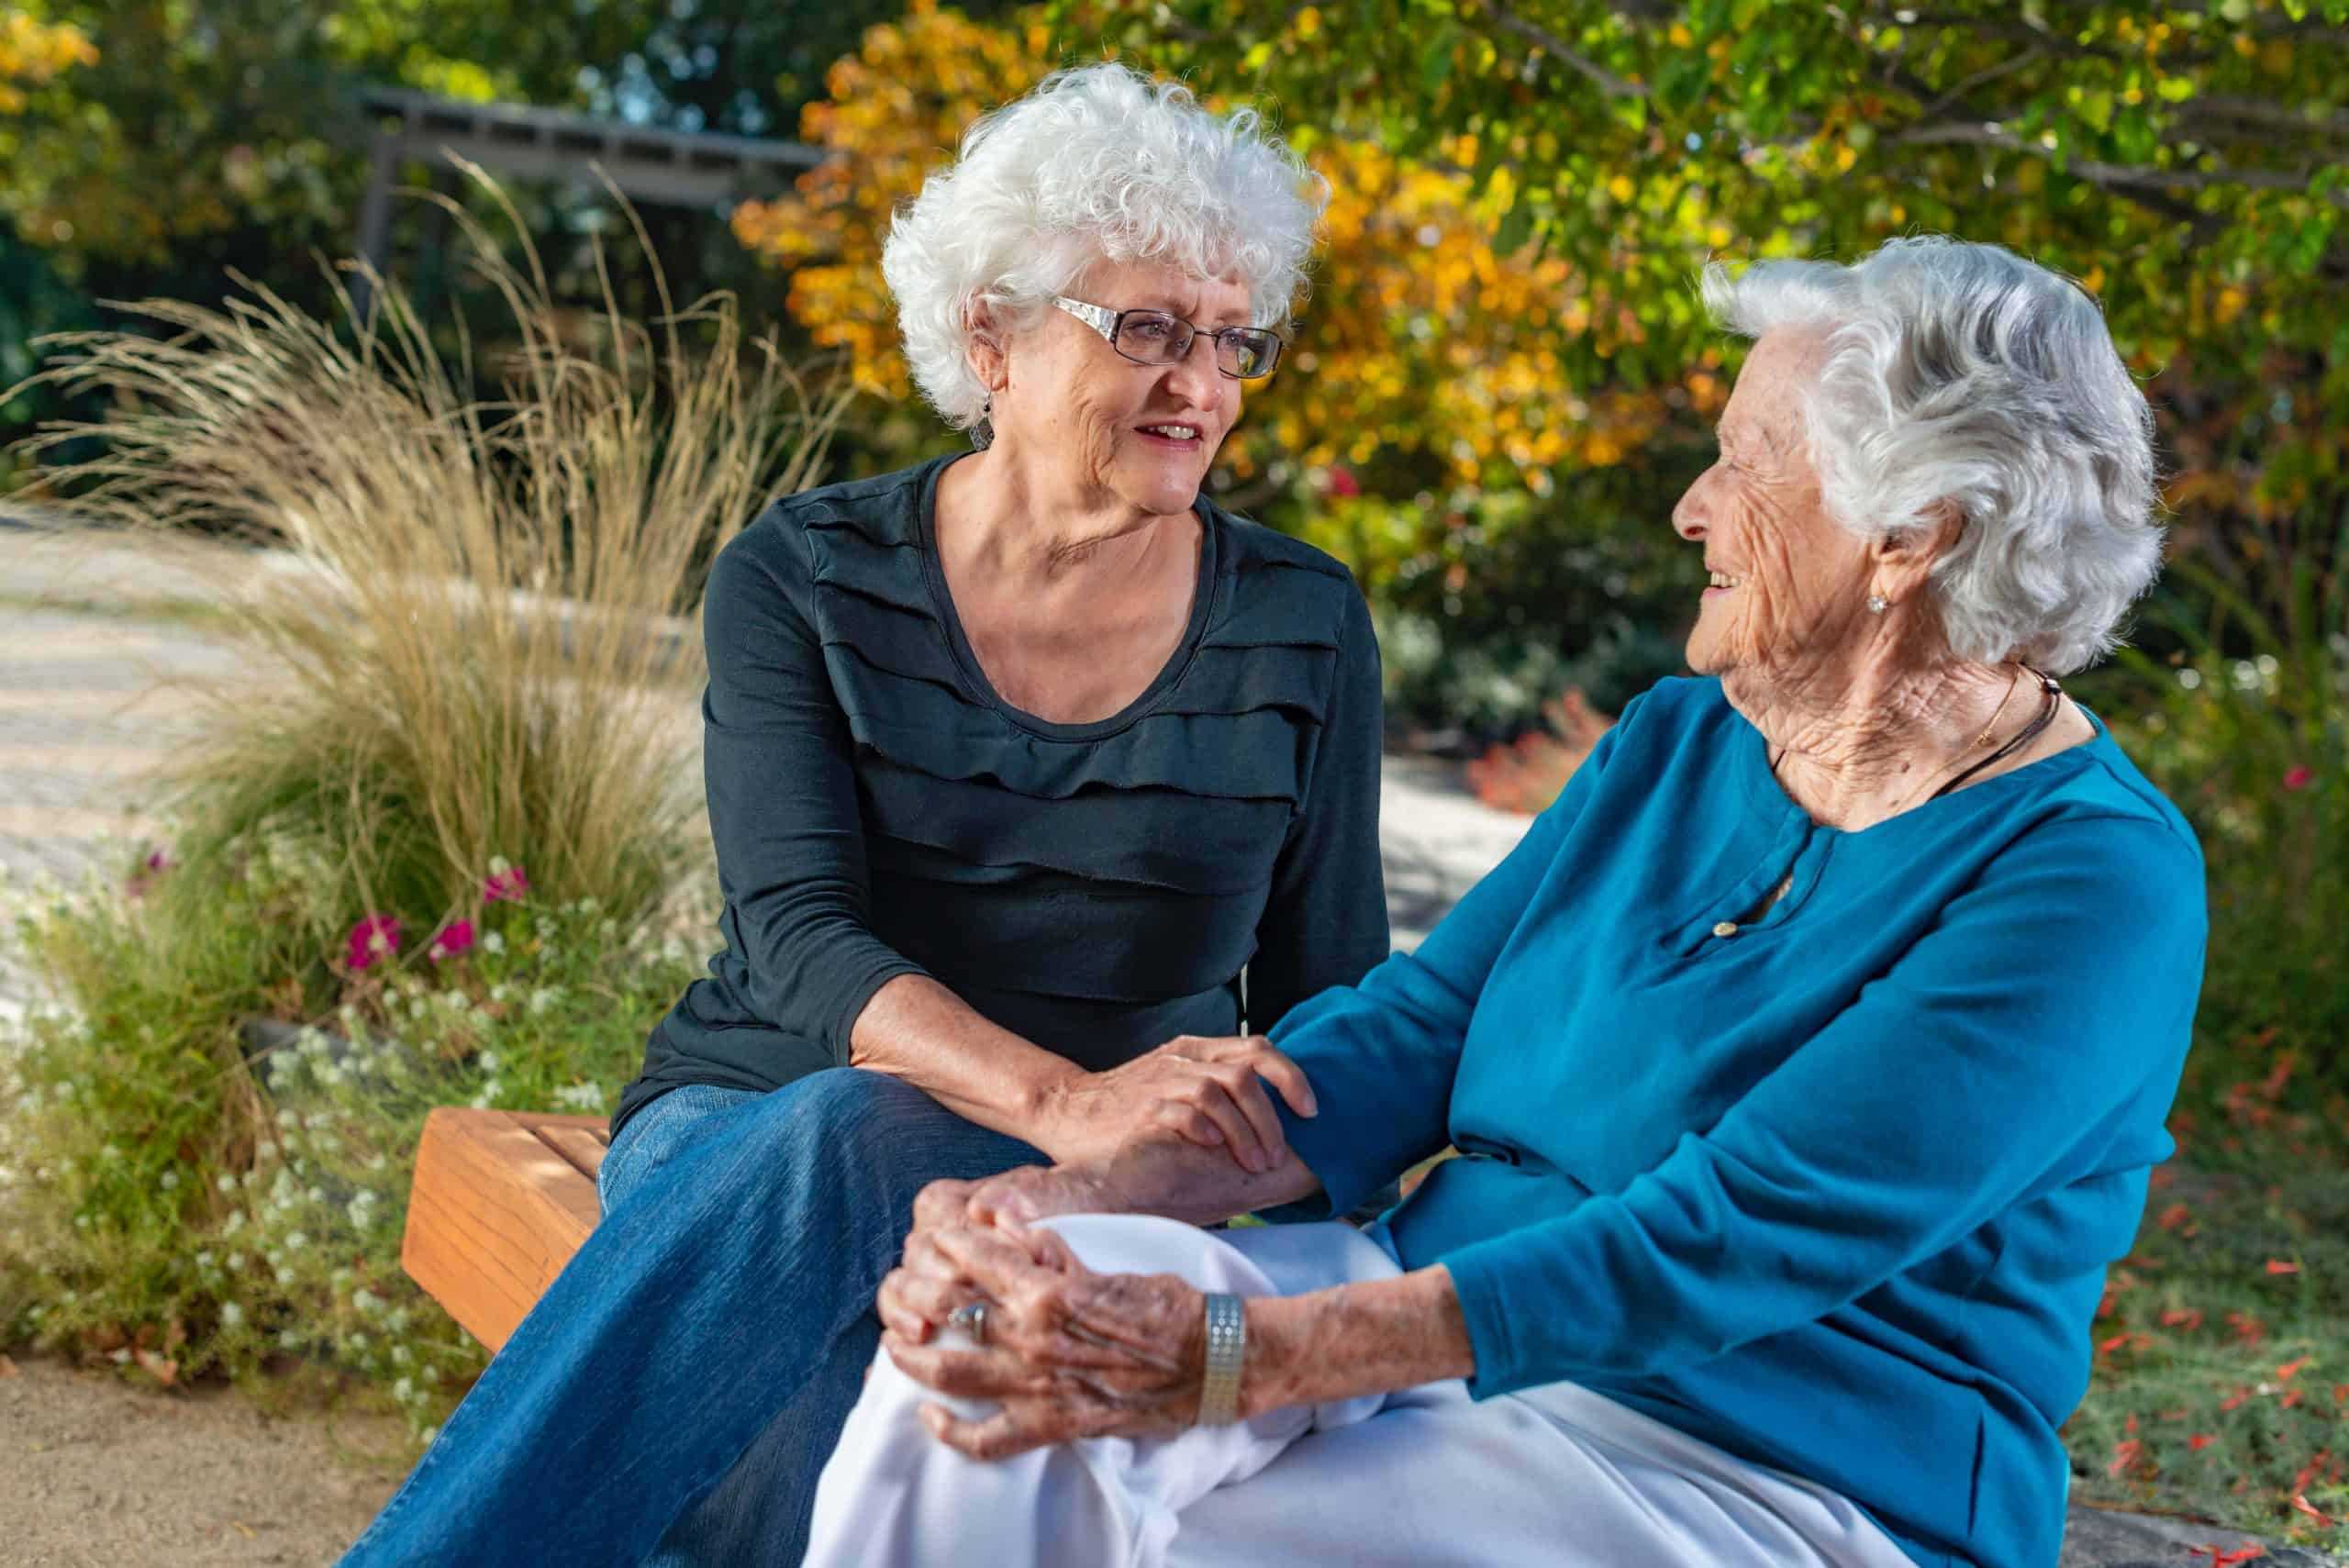 Two elderly women talking and smiling on a bench in a garden